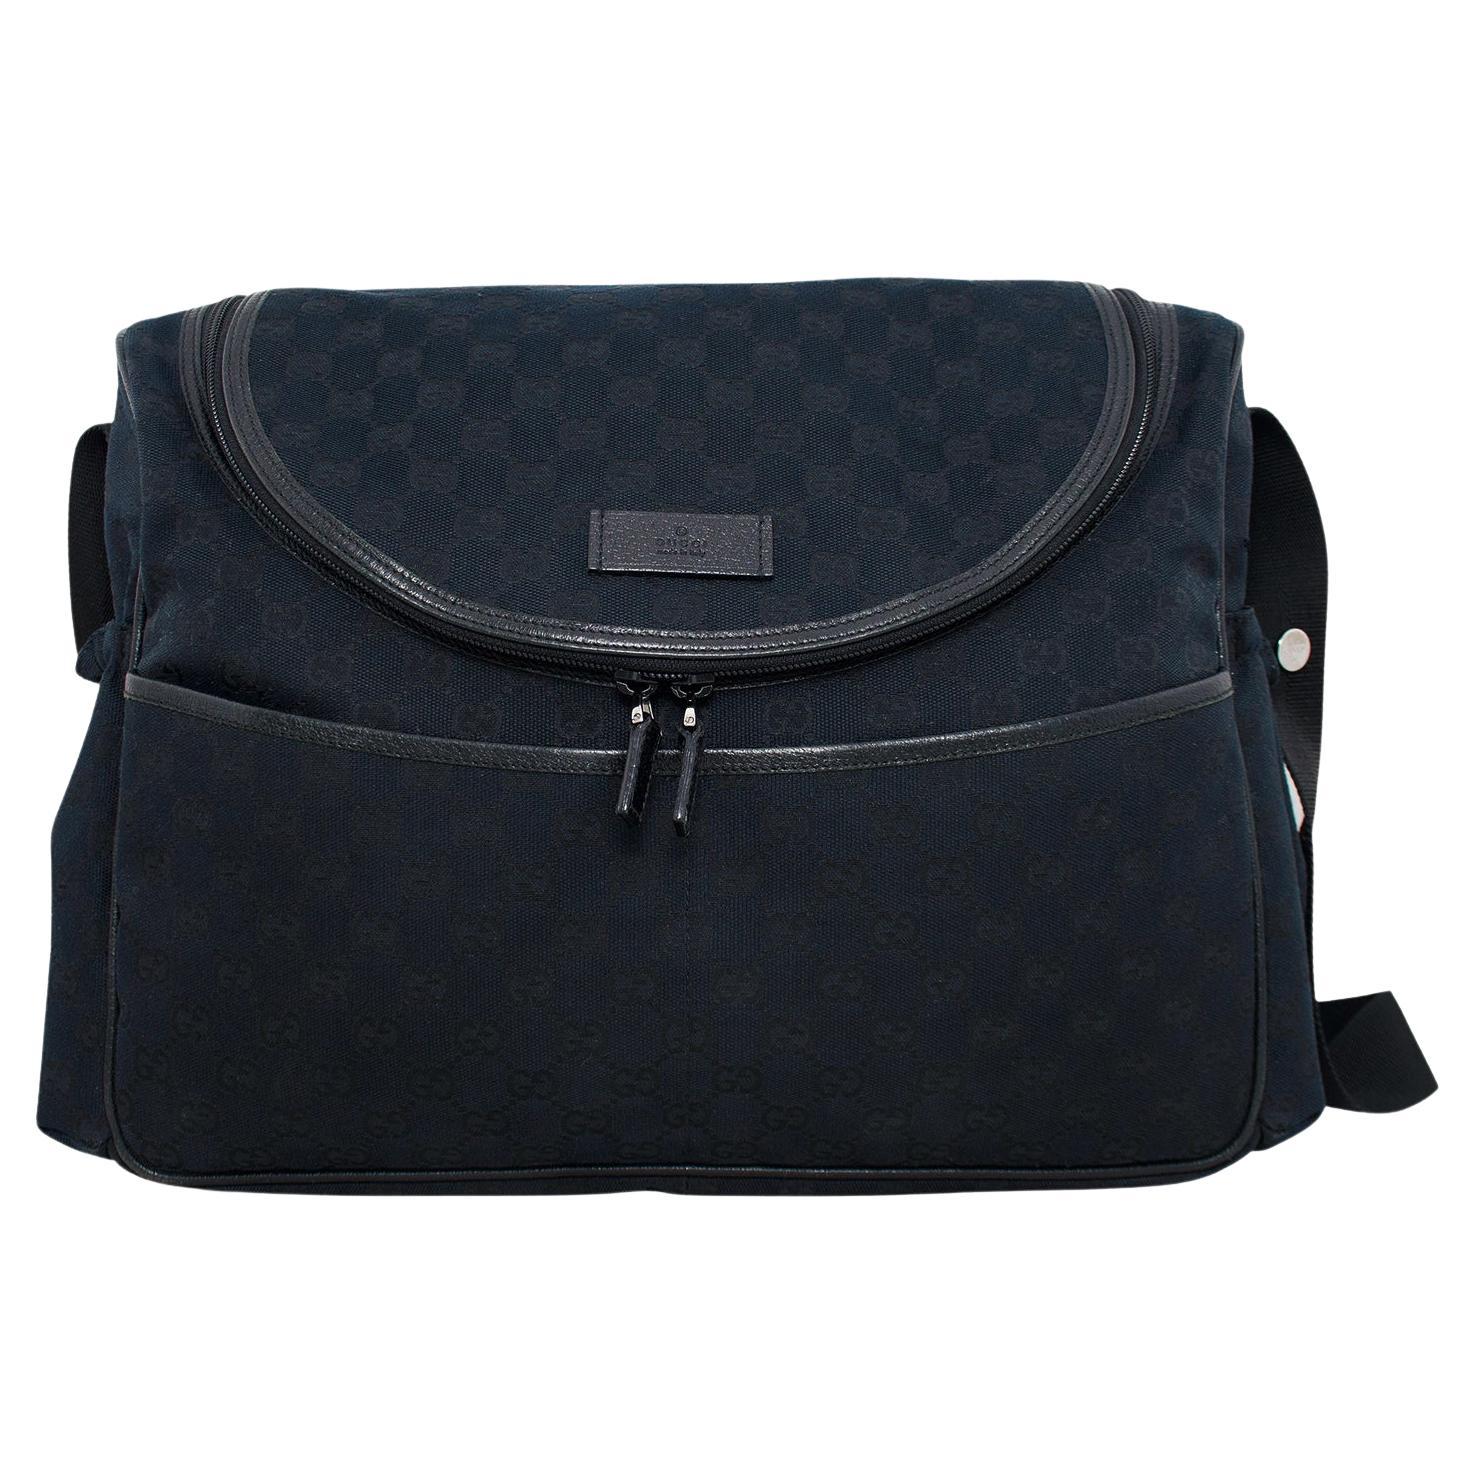 Early 2000s Gucci Black Monogram Canvas Diaper Bag  For Sale